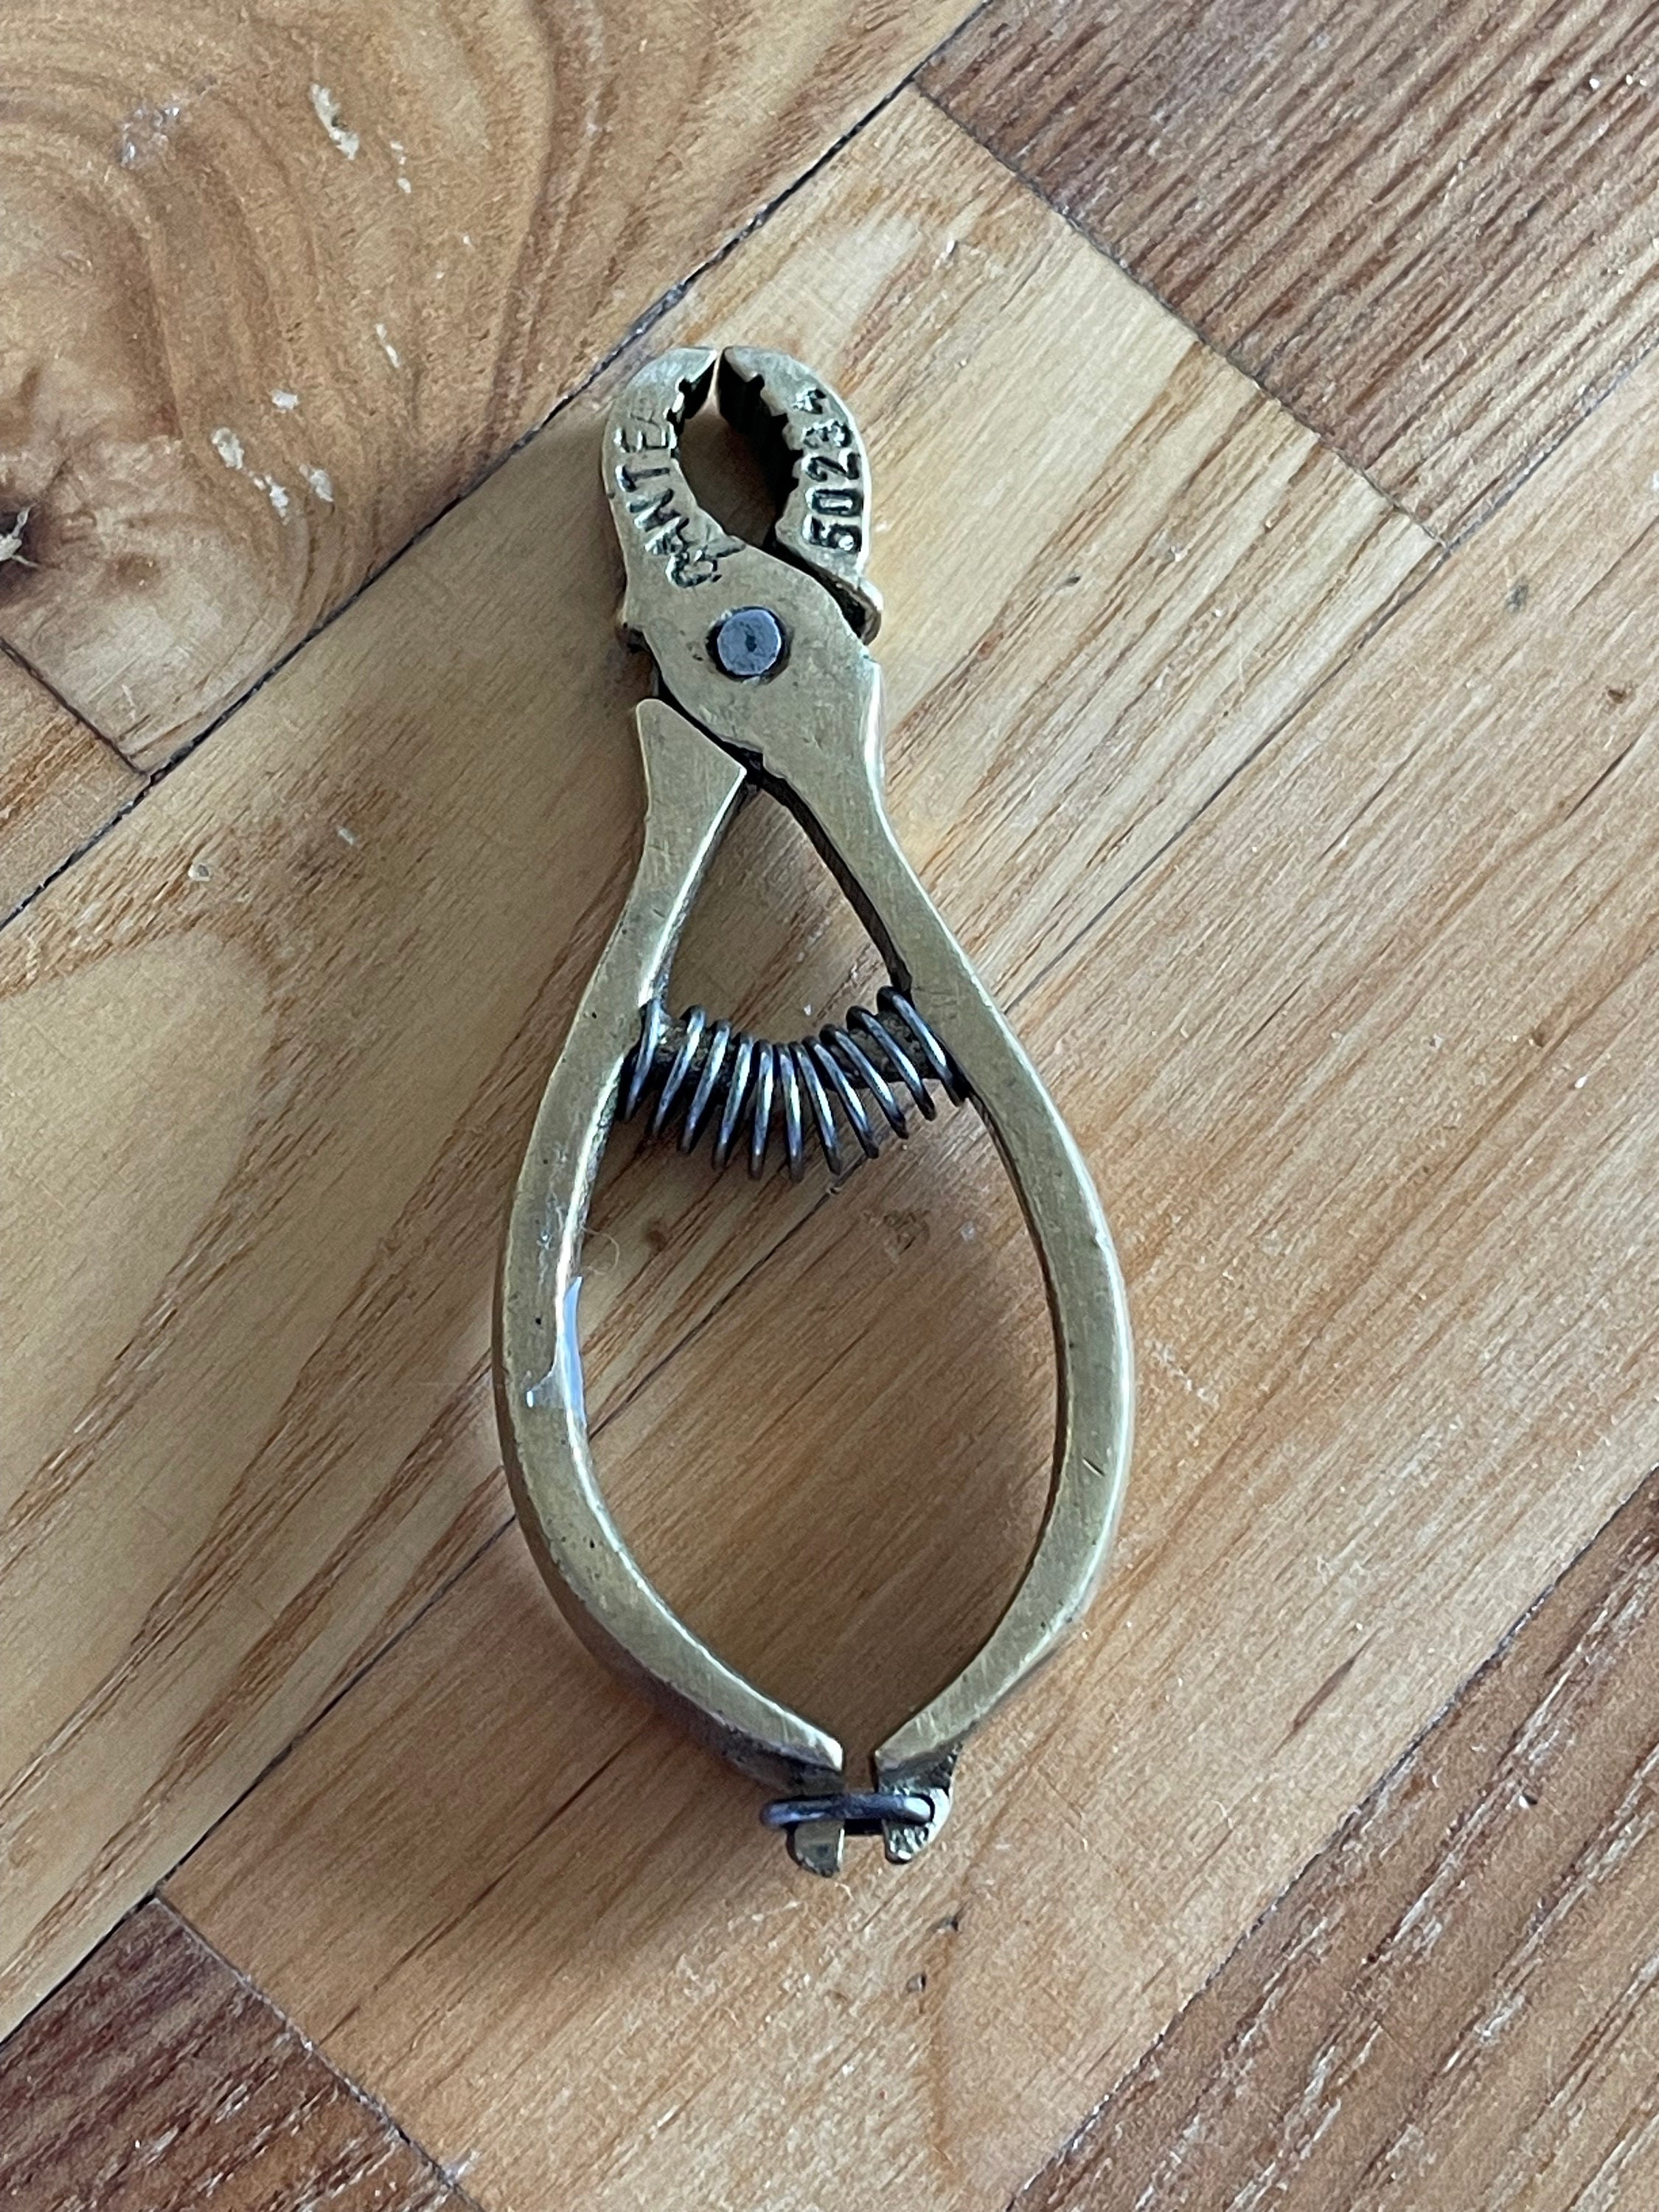 Brass Jaw Flat Nose Parallel Pliers New Lower Price